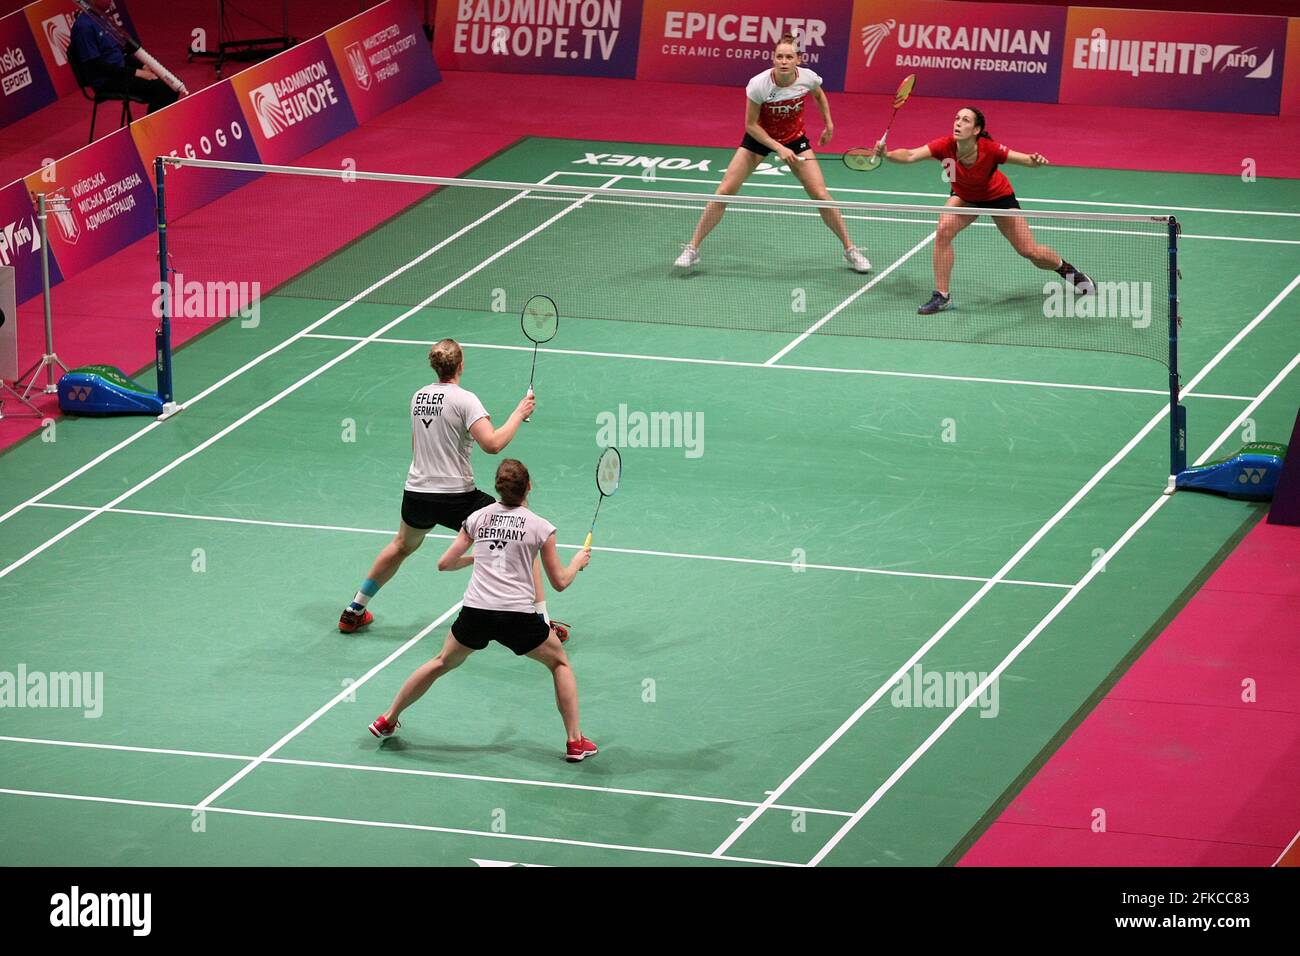 KYIV, UKRAINE - APRIL 30, 2021 - Linda Efler and Isabel Herttrich of  Germany (white kit) compete against Chloe Birch Lauren Smith of England  (red kit) during the women's doubles quarter-final match